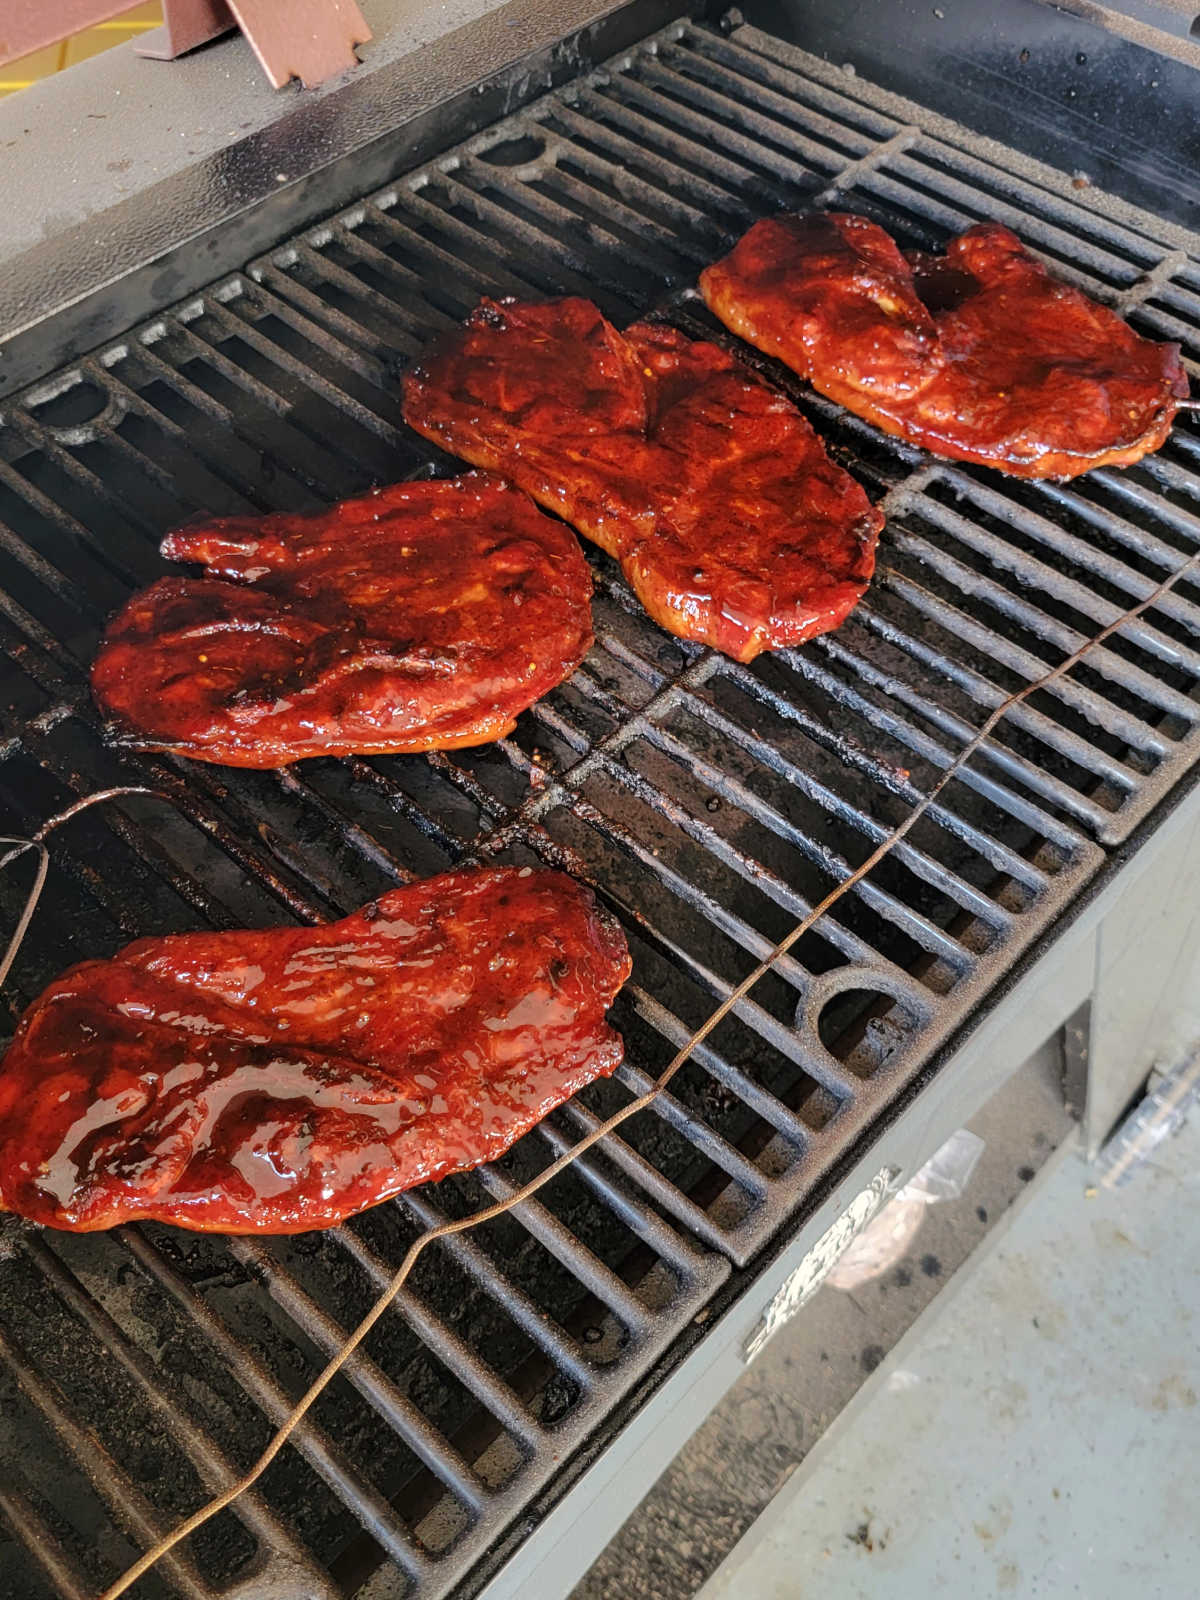 Sauced bbq pork steaks are back on the grill grates, they are tender and now just need some caramelization.